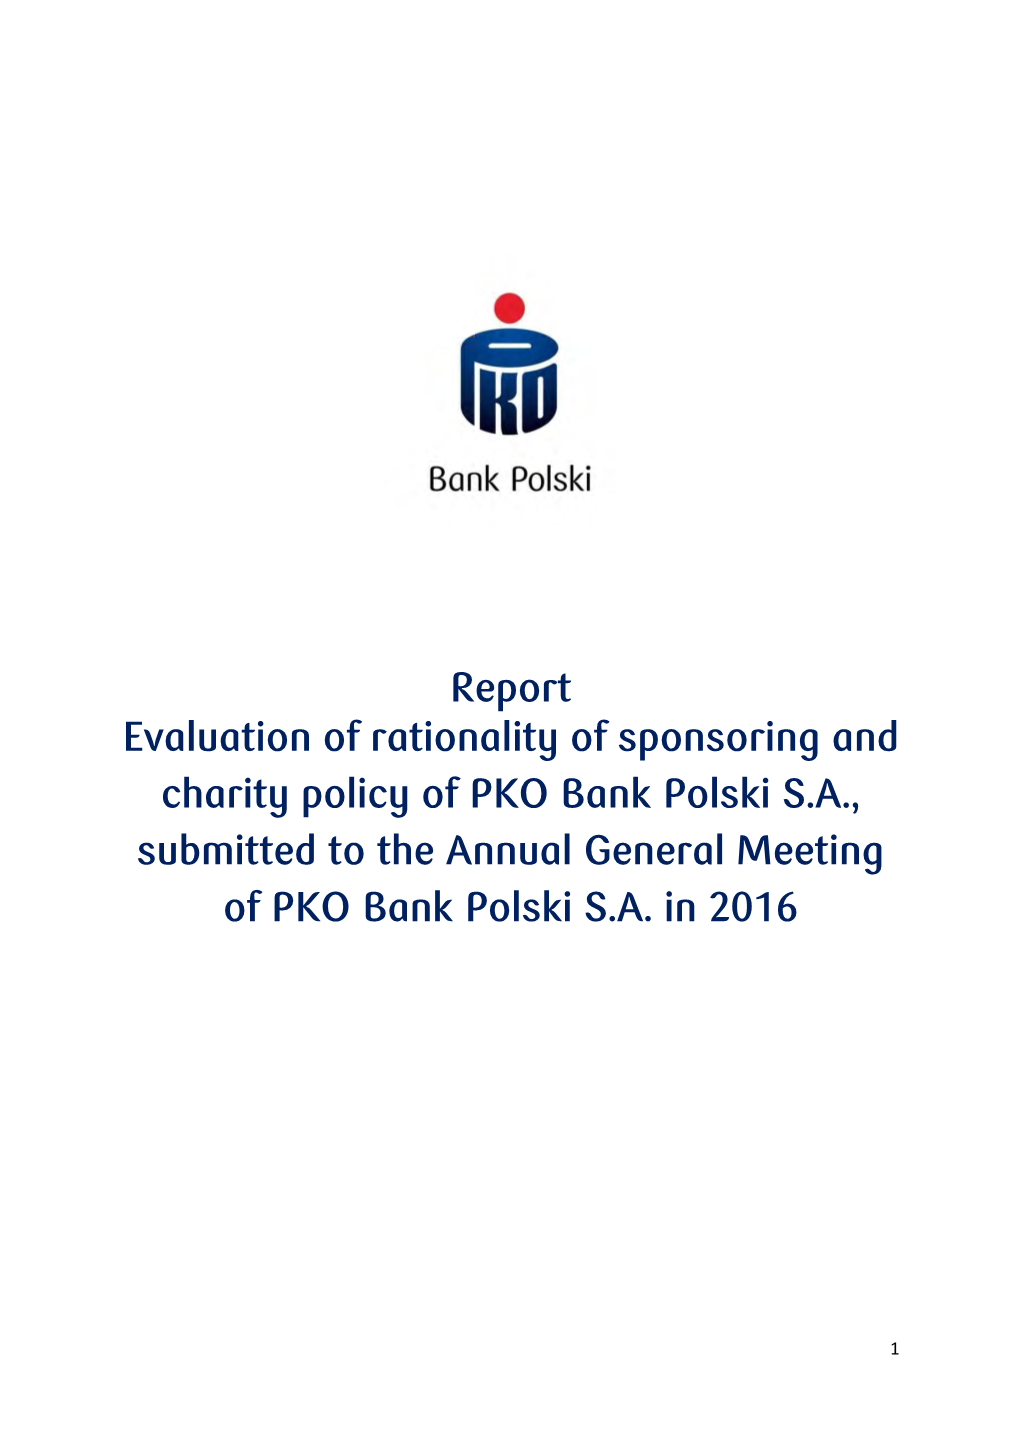 23 Report from Evaluation of Rationality of Sponsoring and Charity Policy of PKO BP SA